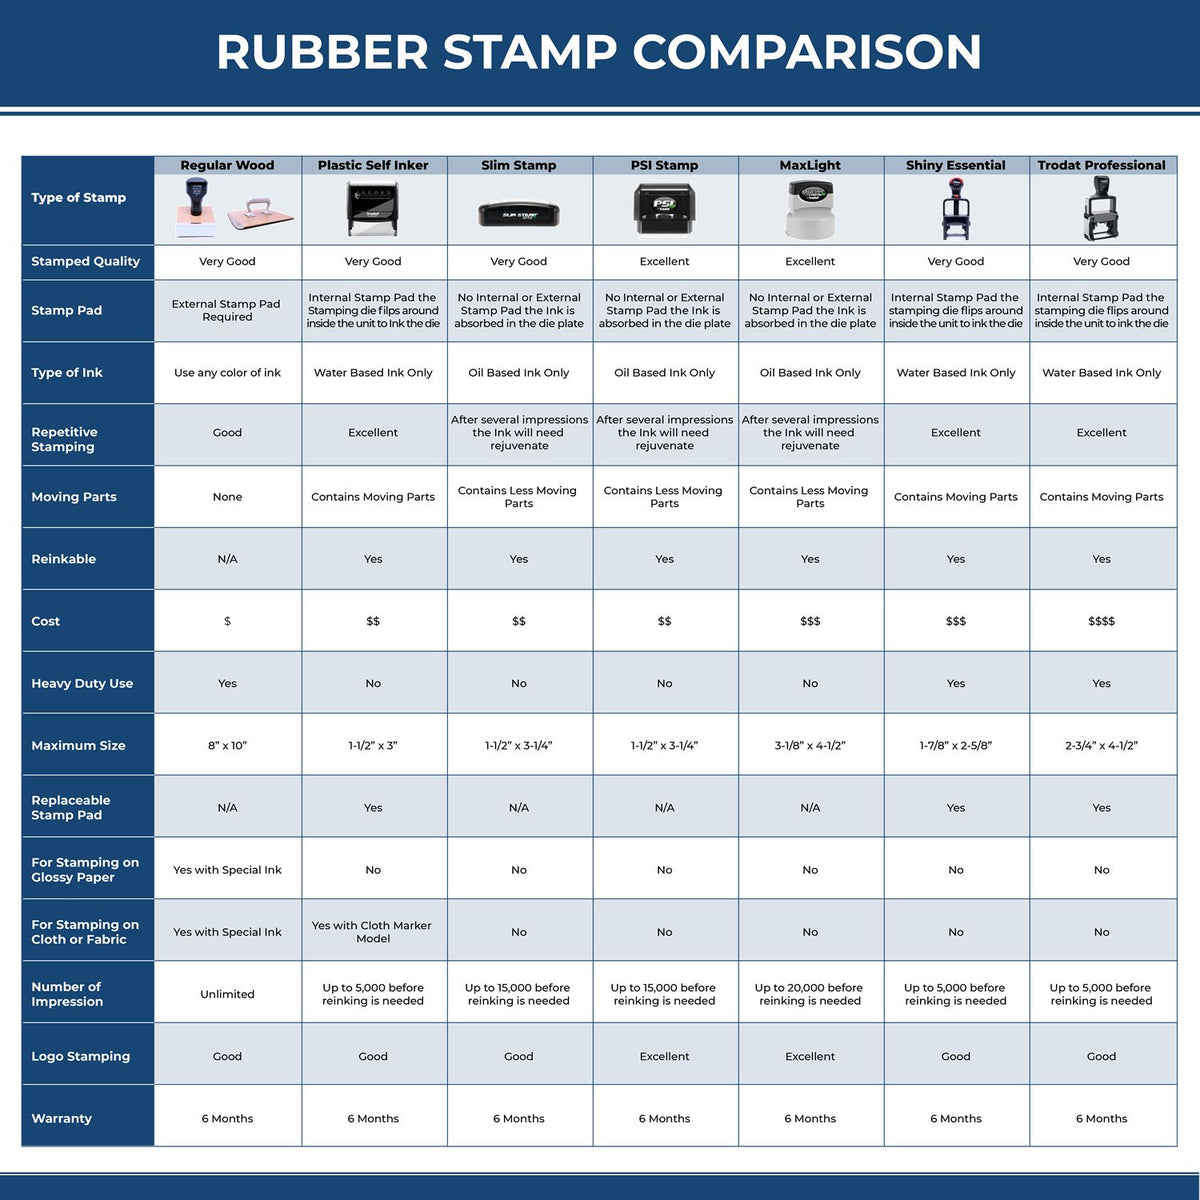 Large Self Inking Community Property Stamp 4610S Rubber Stamp Comparison